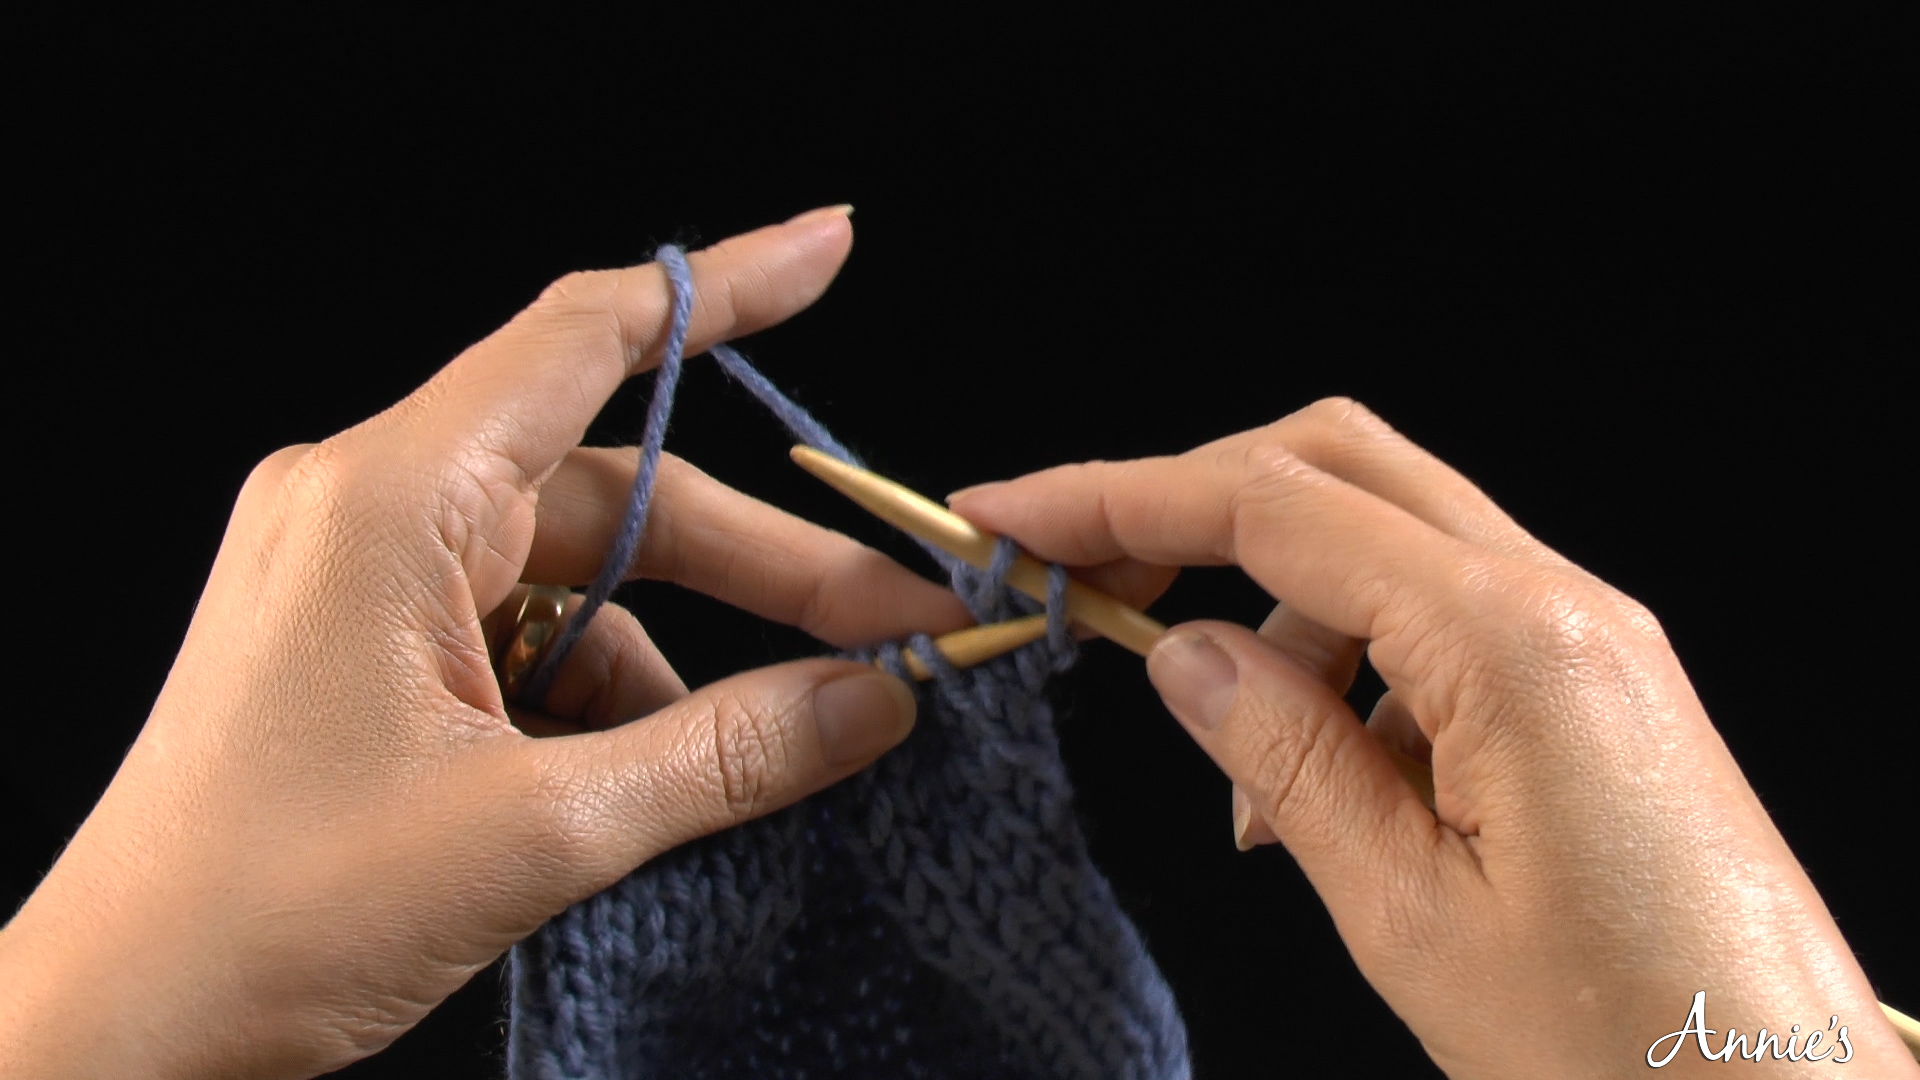 How to Cast Off When Knitting - Bind Off Knitting for Beginners